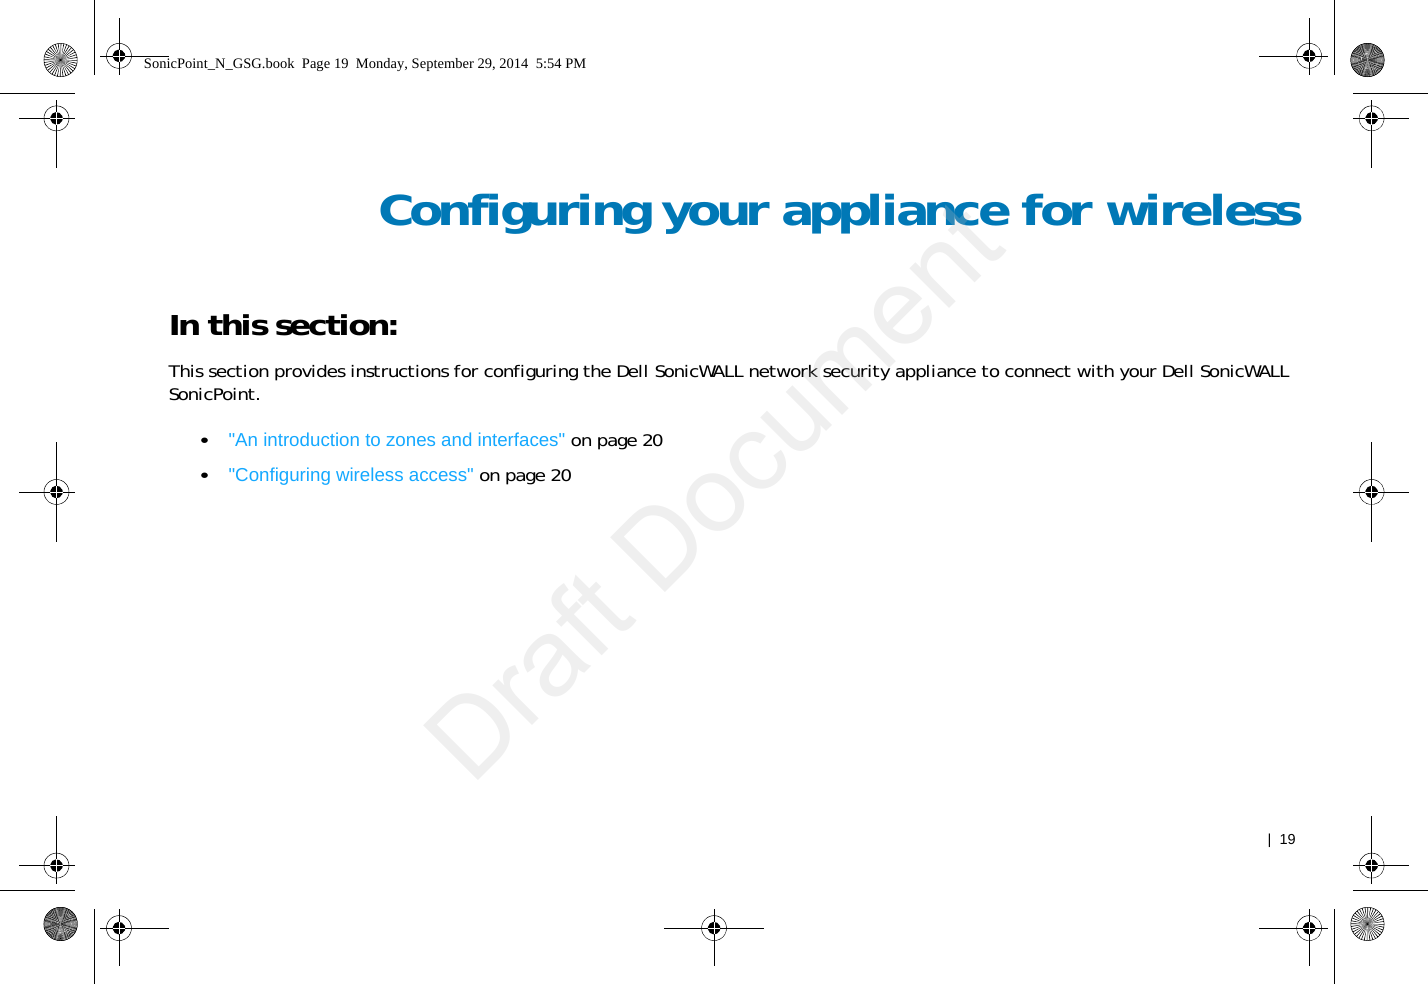   |  19Configuring your appliance for wirelessIn this section:This section provides instructions for configuring the Dell SonicWALL network security appliance to connect with your Dell SonicWALL SonicPoint.•&quot;An introduction to zones and interfaces&quot; on page 20•&quot;Configuring wireless access&quot; on page 20SonicPoint_N_GSG.book  Page 19  Monday, September 29, 2014  5:54 PMDraft Document